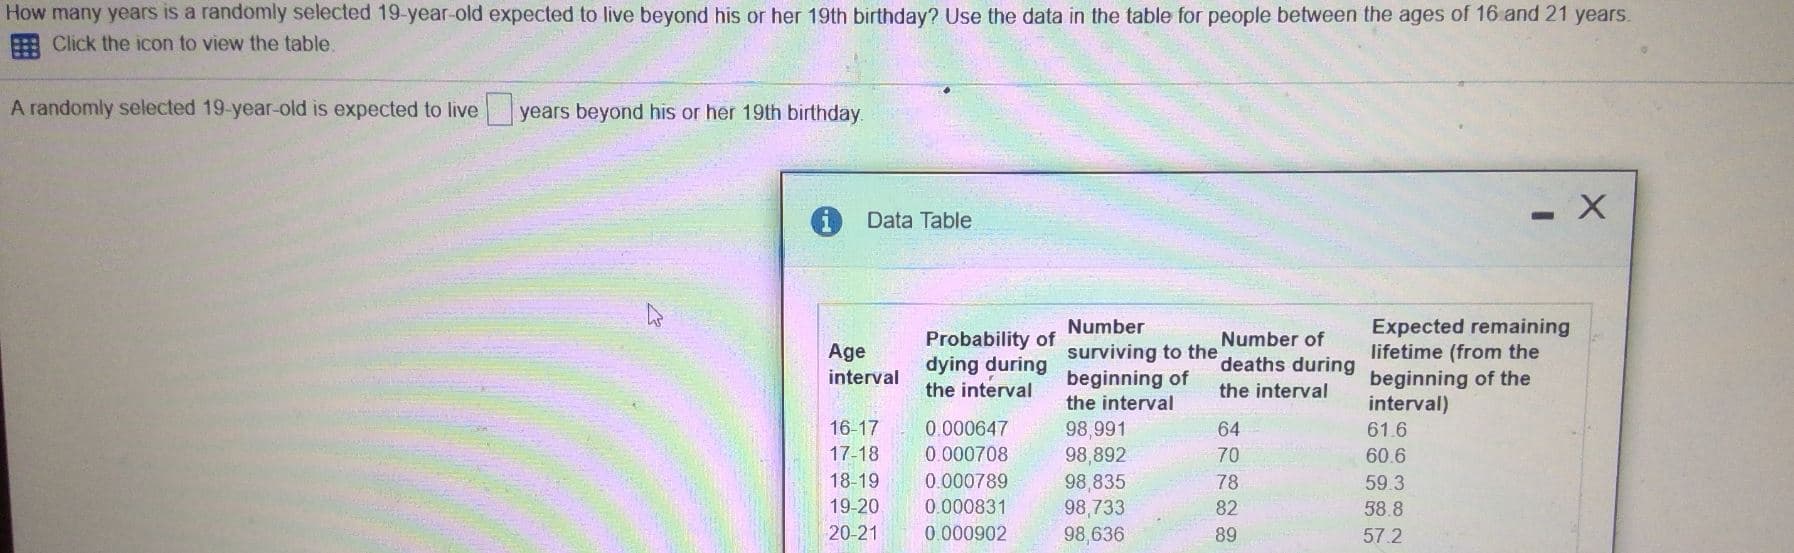 How many years is a randomly selected 19-year-old expected to live beyond his or her 19th birthday? Use the data in the table for people between the ages of 16 and 21 years.
E Click the icon to view the table.
A randomly selected 19-year-old is expected to live years beyond his or her 19th birthday
Data Table
Expected remaining
lifetime (from the
beginning of the
interval)
Number
Probability of
dying during
the interval
Number of
surviving to the
beginning of
the interval
Age
deaths during
interval
the interval
16-17
0.000647
98,991
98,892
98,835
98,733
98,636
64
61.6
17-18
0.000708
60.6
0.000789
18-19
78
59.3
19-20
0.000831
82
38.8
20-21
0.000902
89
57.2
